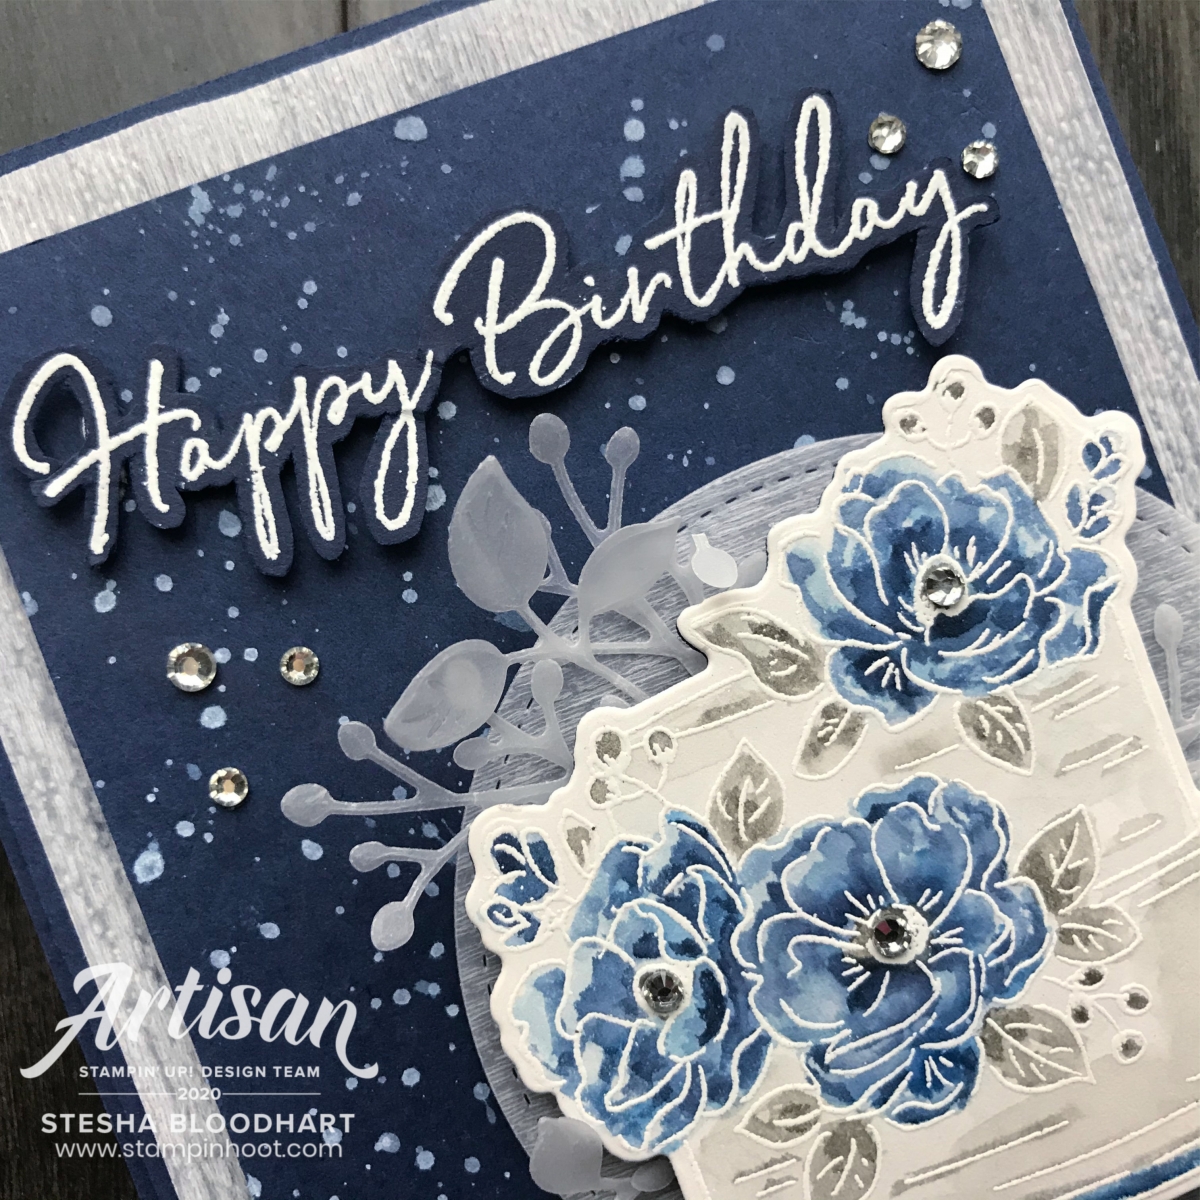 Birthday Dies Coordination Product by Stampin' Up! Created by Stesha Bloodhart, 2020 Artisan Design Team